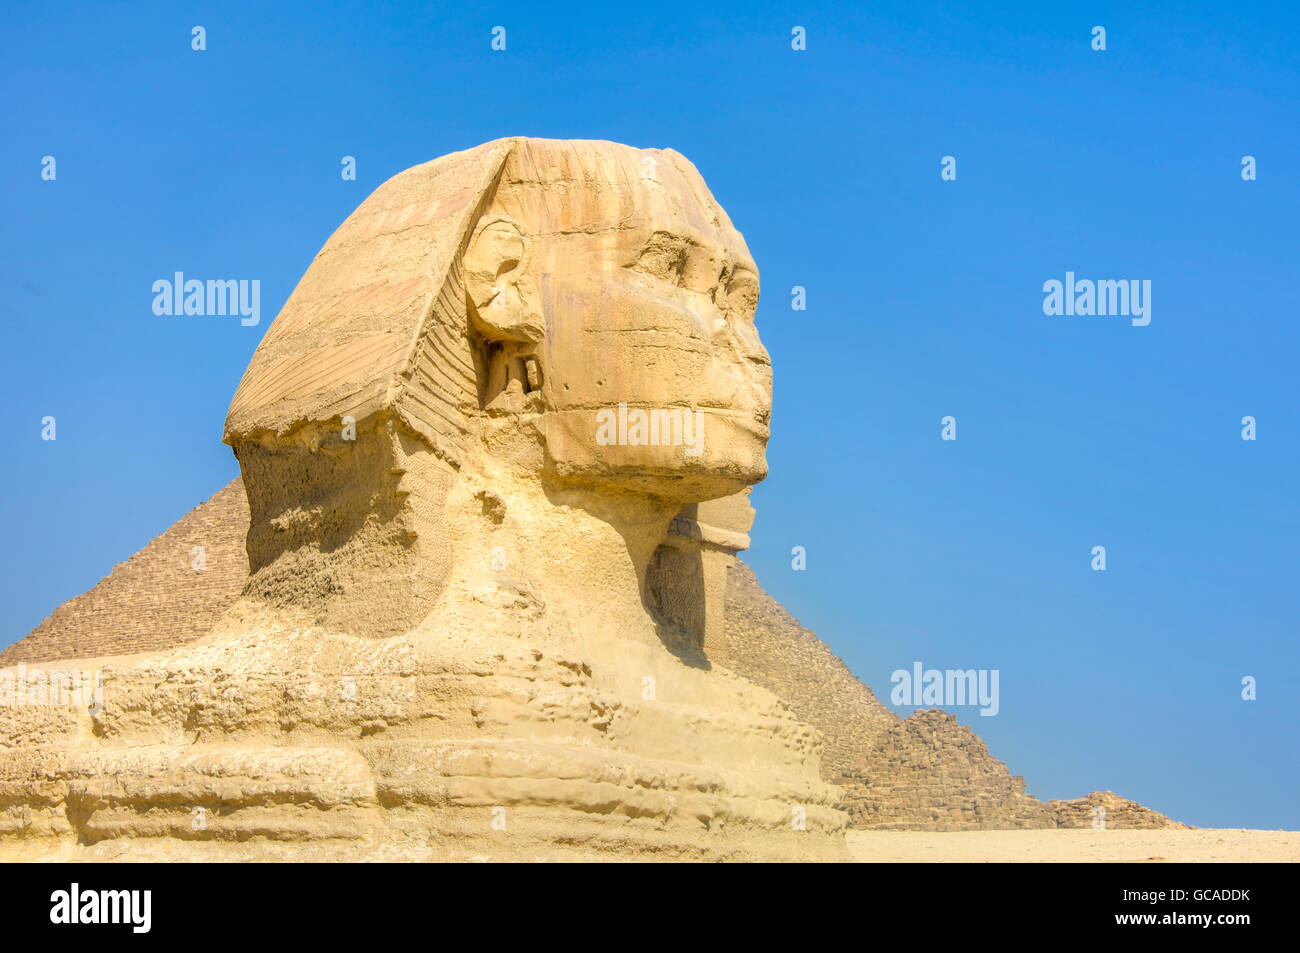 The Great Sphinx of Giza. Monumental limestone statue with a lion's ...